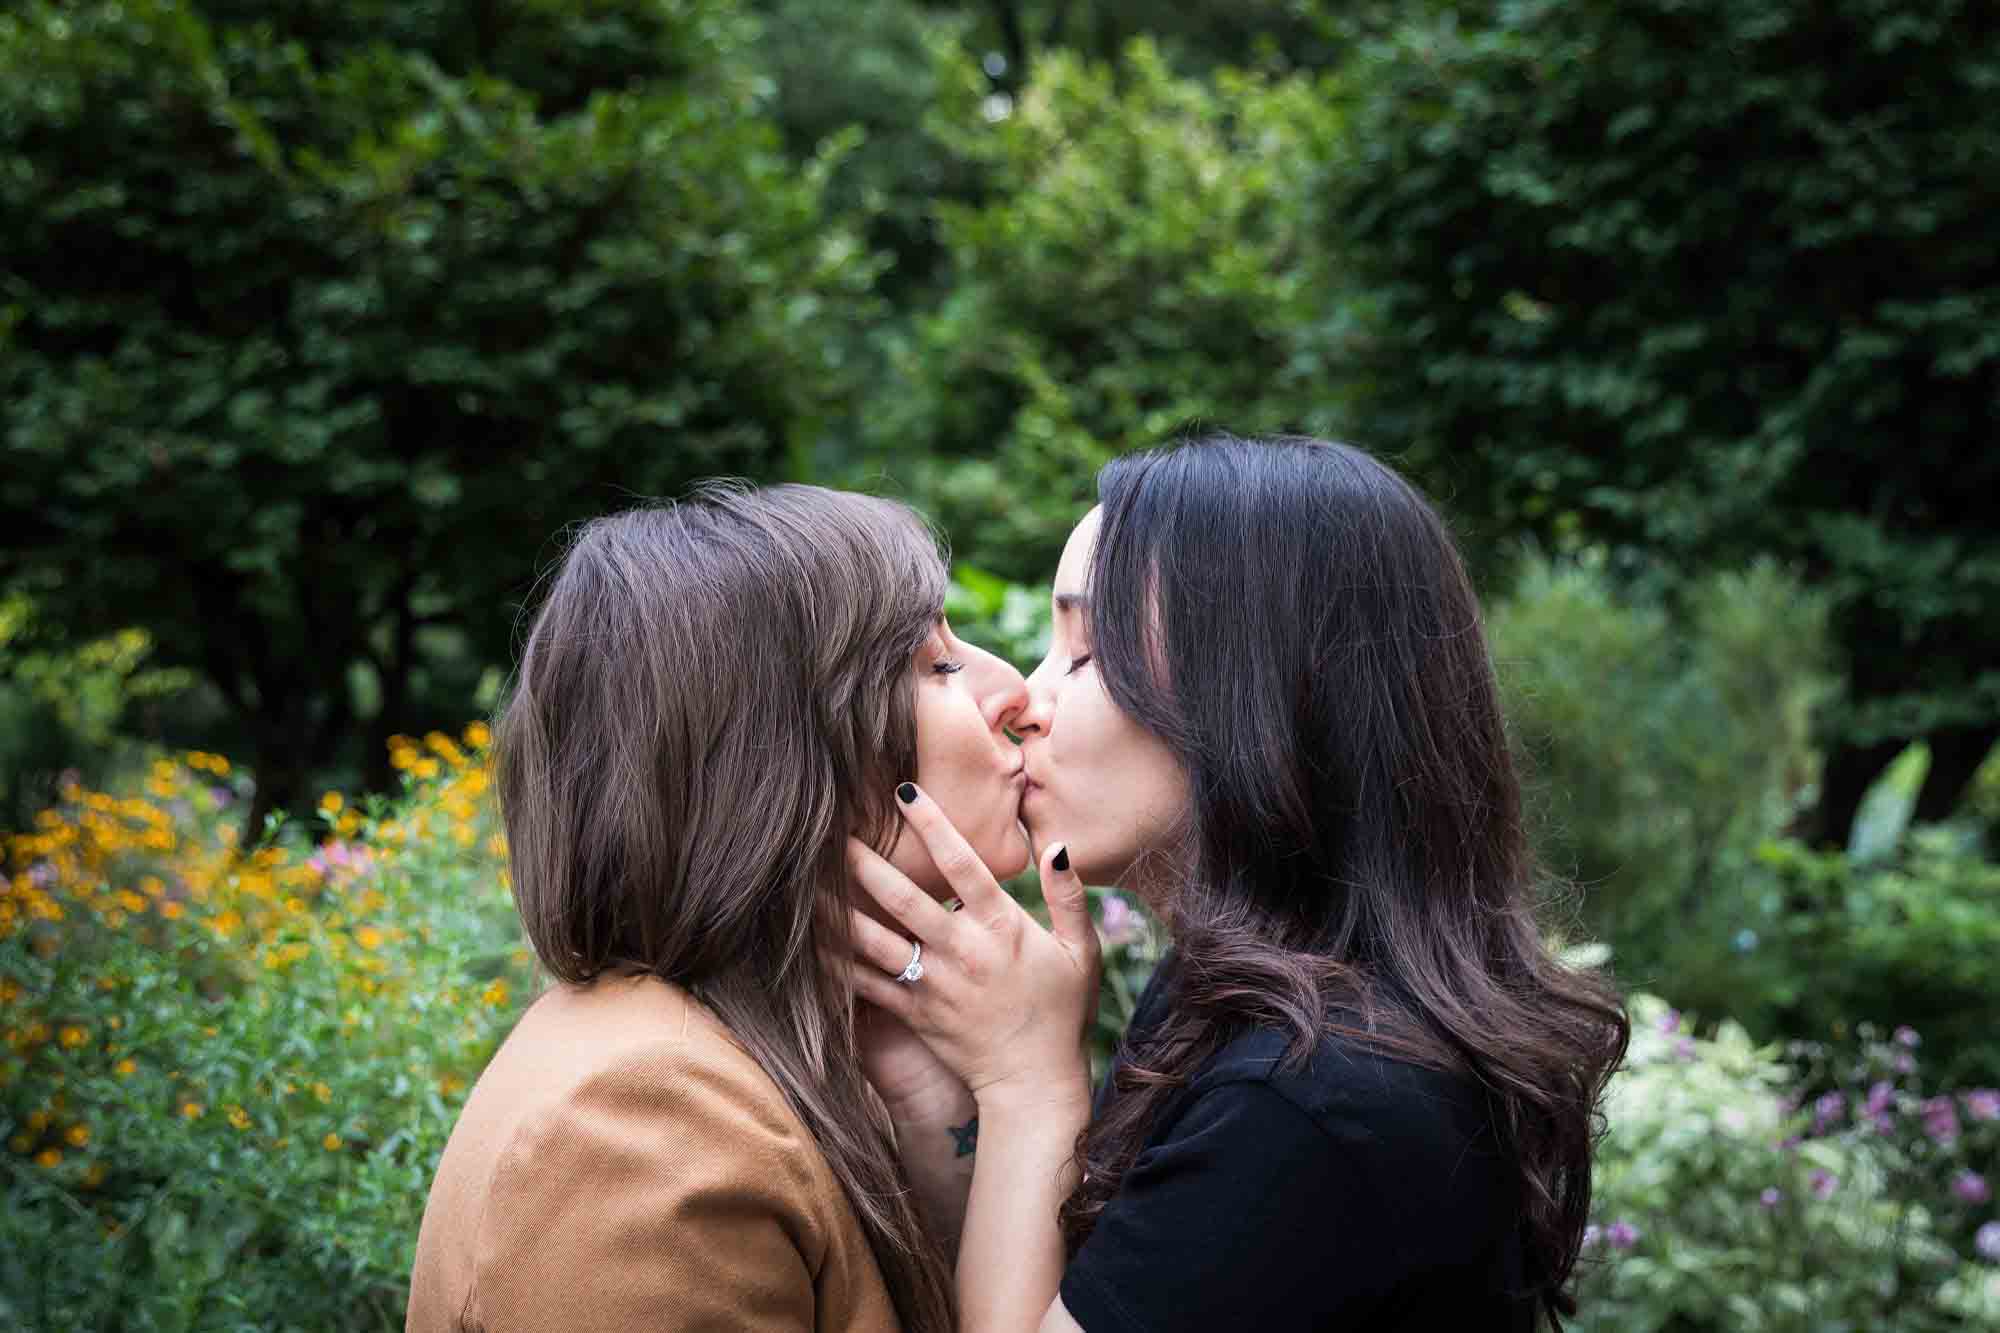 Two women kissing in Riverside Park surrounded by green foliage and flowers for an article on how to produce a movie-themed surprise proposal